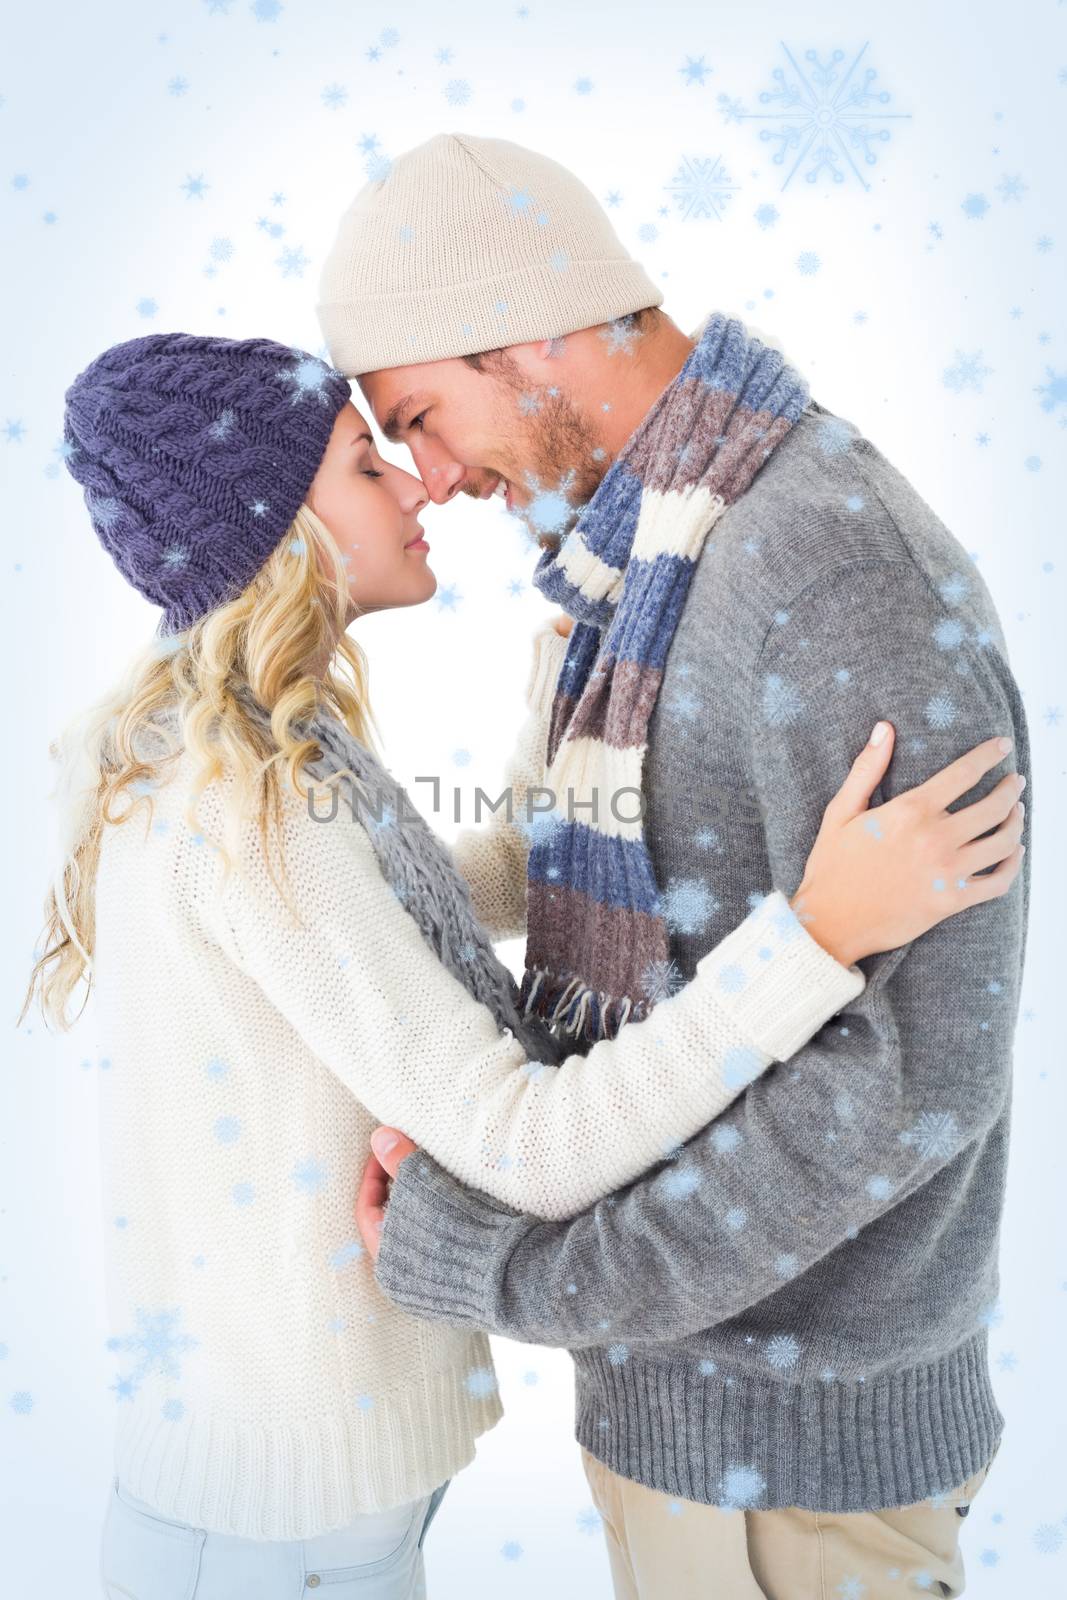 Attractive couple in winter fashion hugging against snow falling